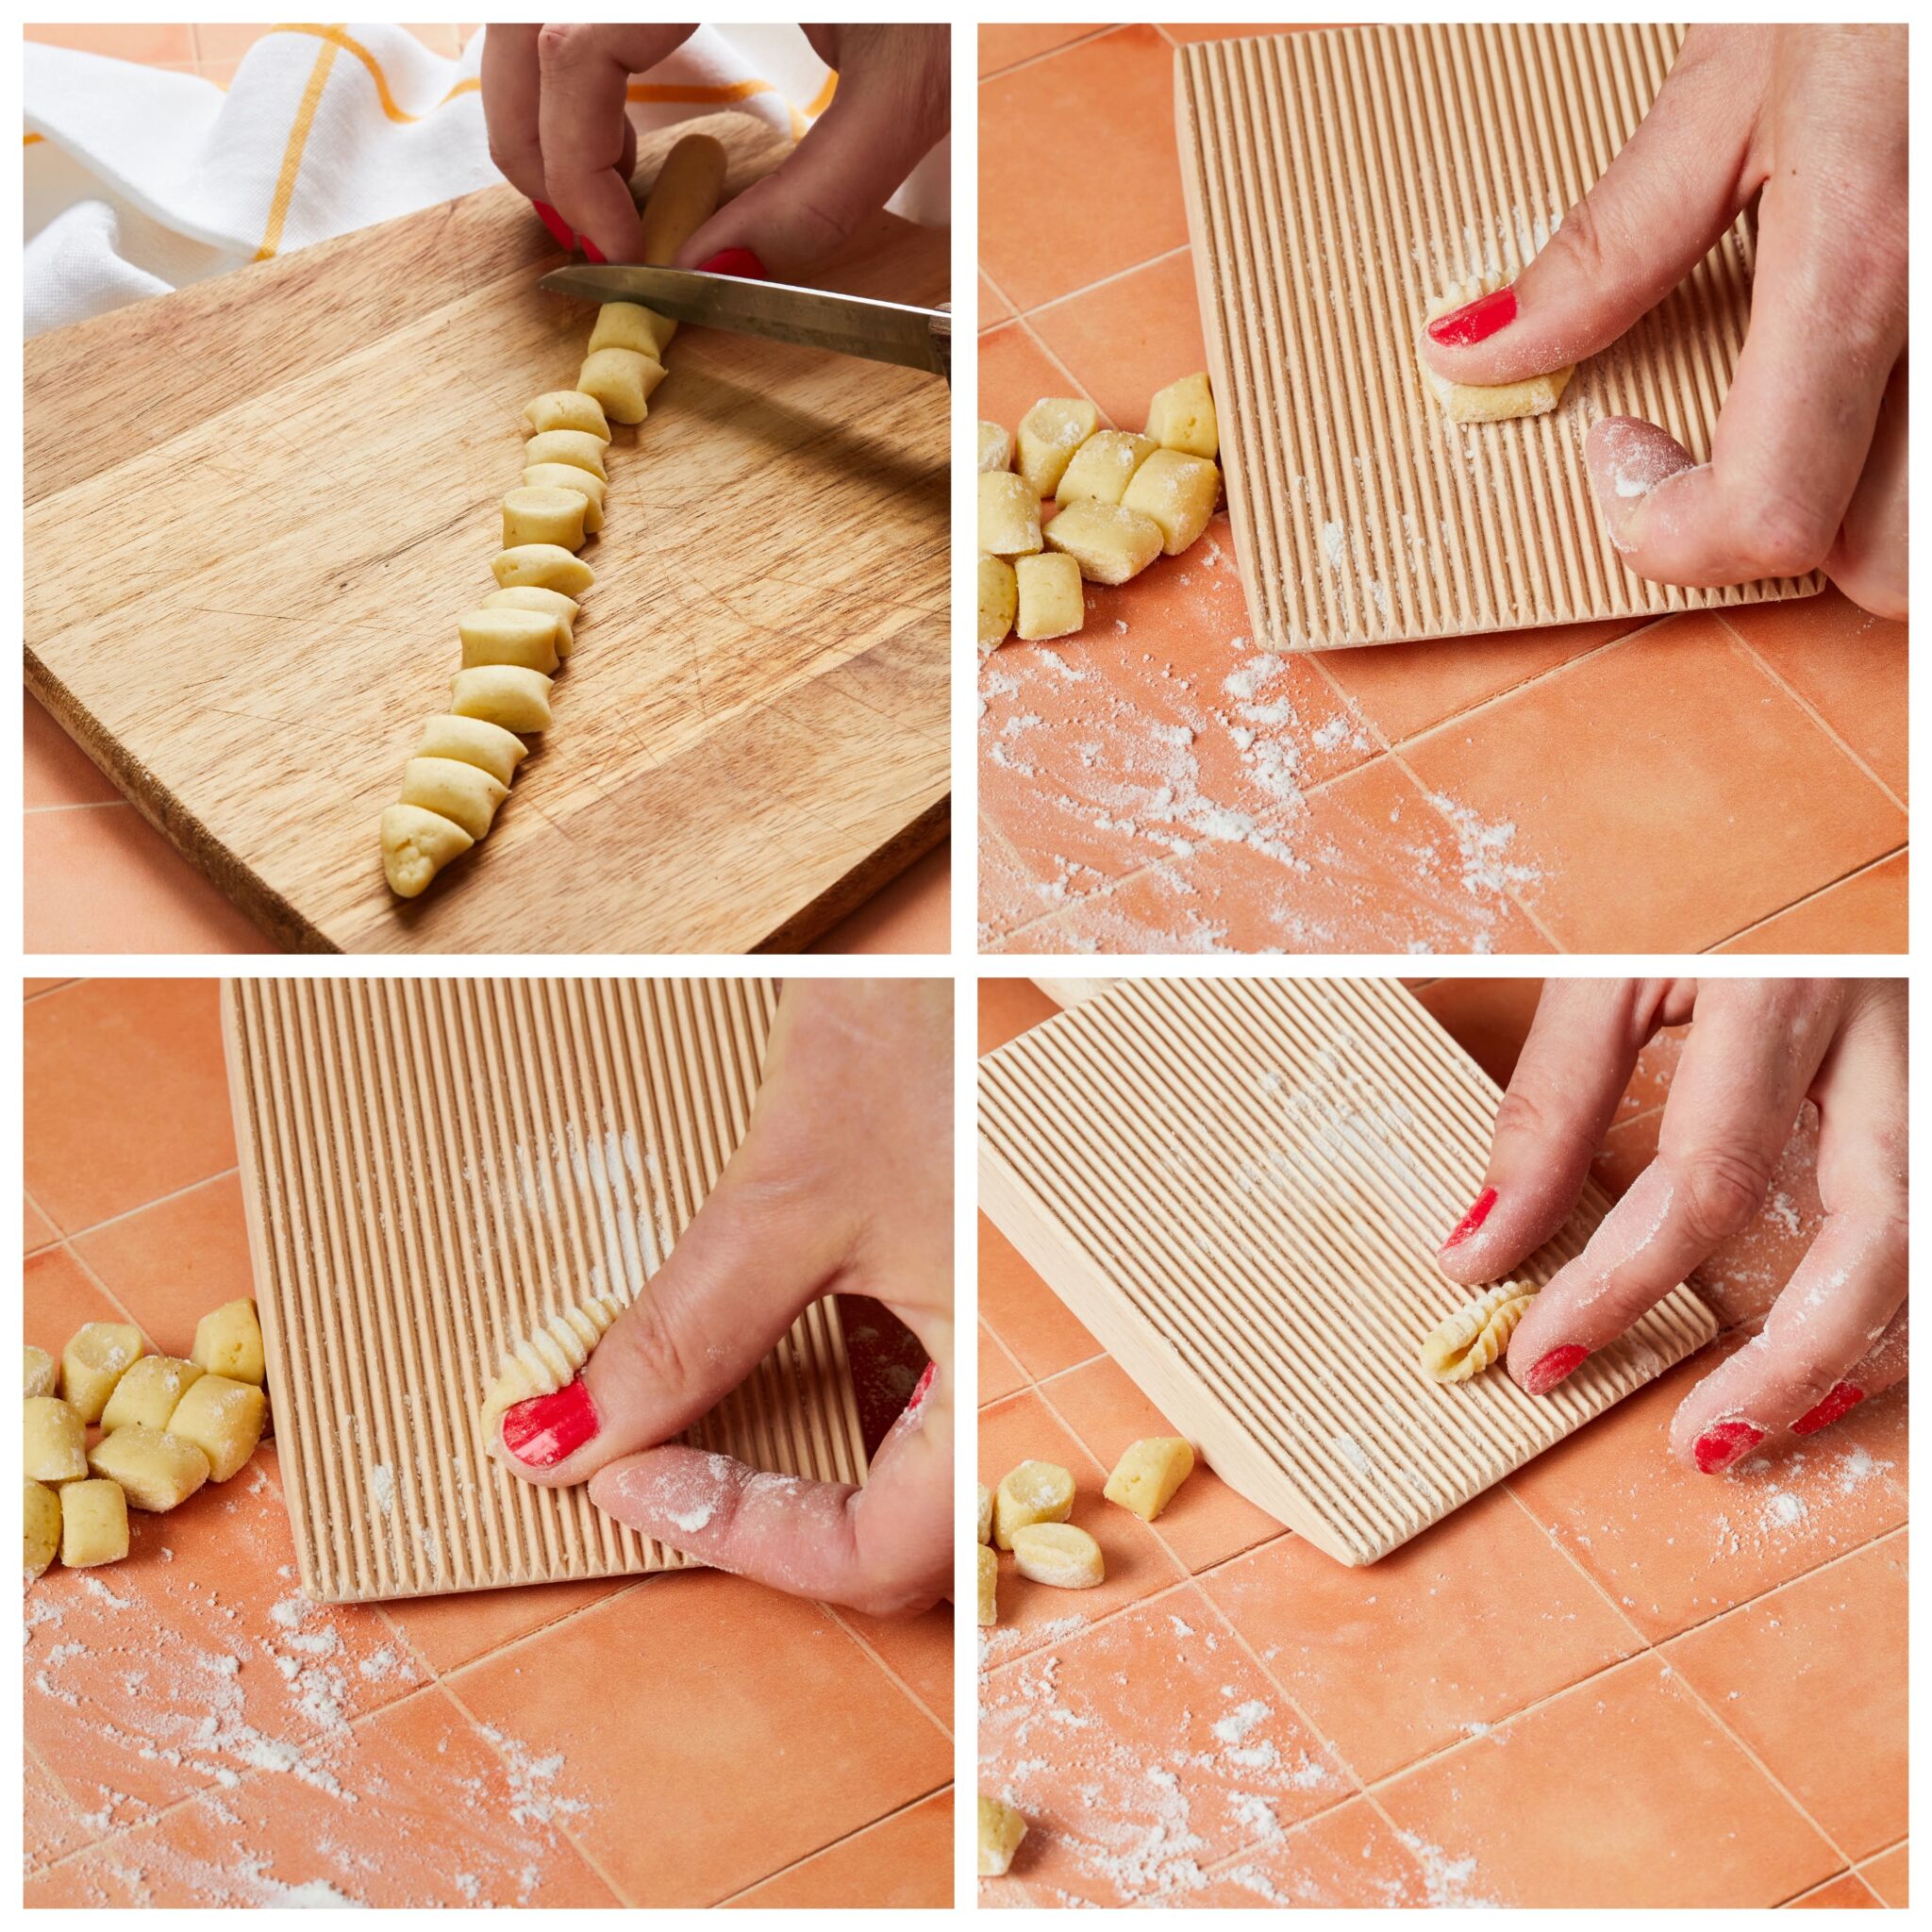 Step-by-step instructions on how to shape Malloreddus pasta Cut the rope into 1/2-inch rectangles. Take each small rectangle of dough one at a time, and press against the lightly floured gnocchi board. Use the side of your thumb to push the dough away and onto the board to curl around your thumb. If you don’t have a gnocchi board, you can try rolling the pieces of dough over the back of a fork.